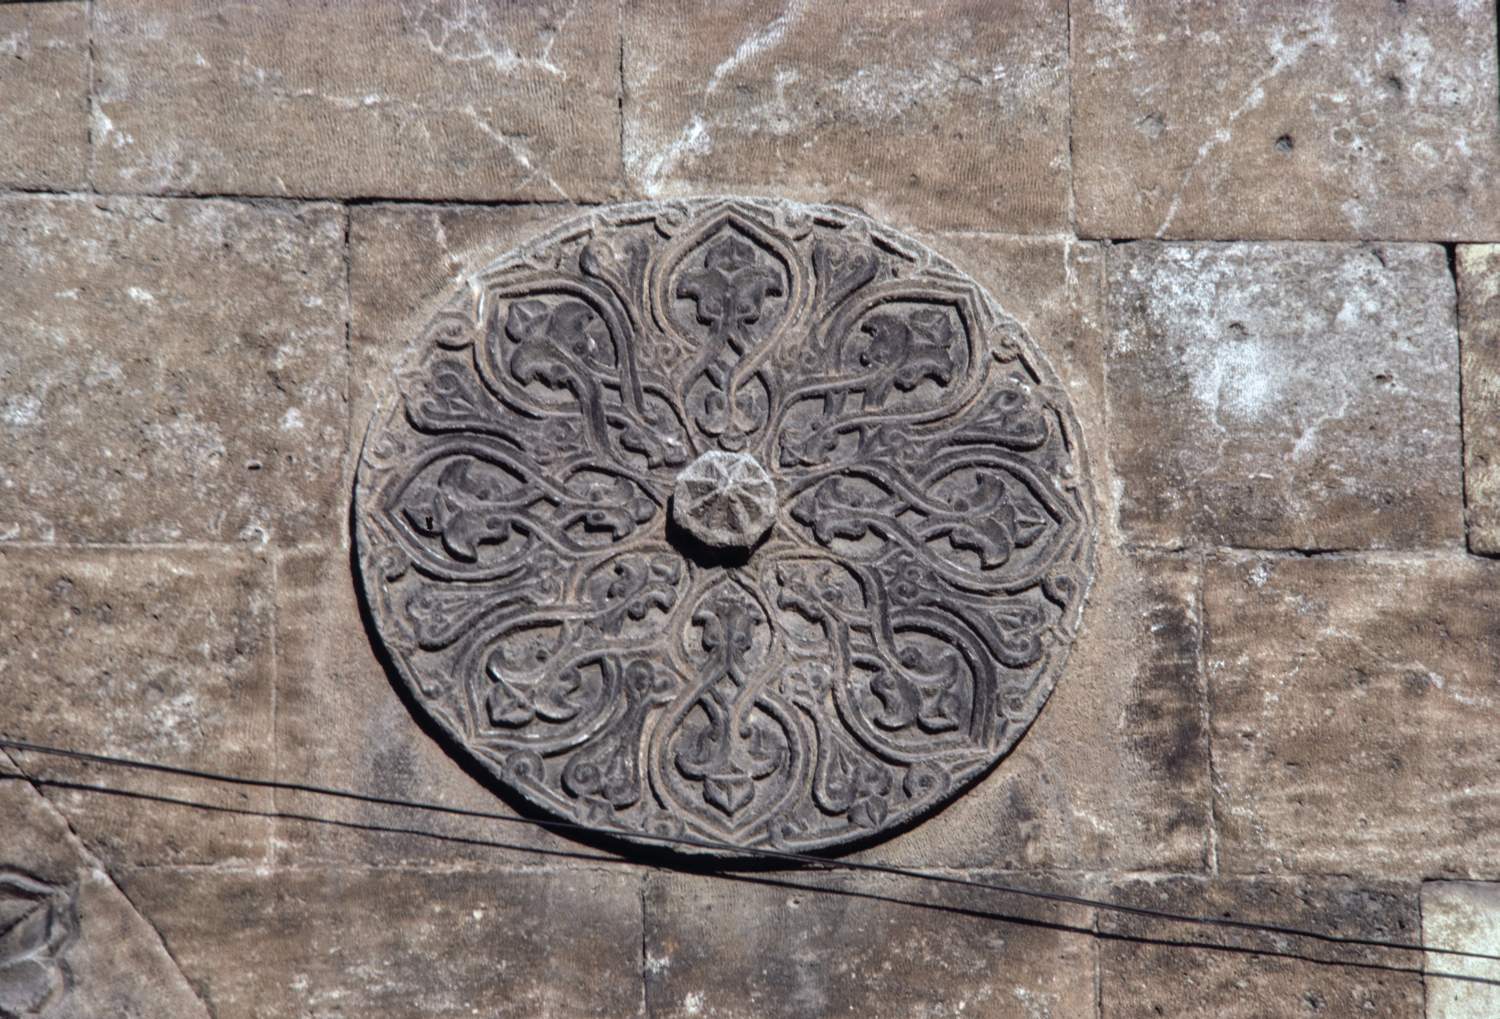 Exterior of entry portal, detail of decorative medallion